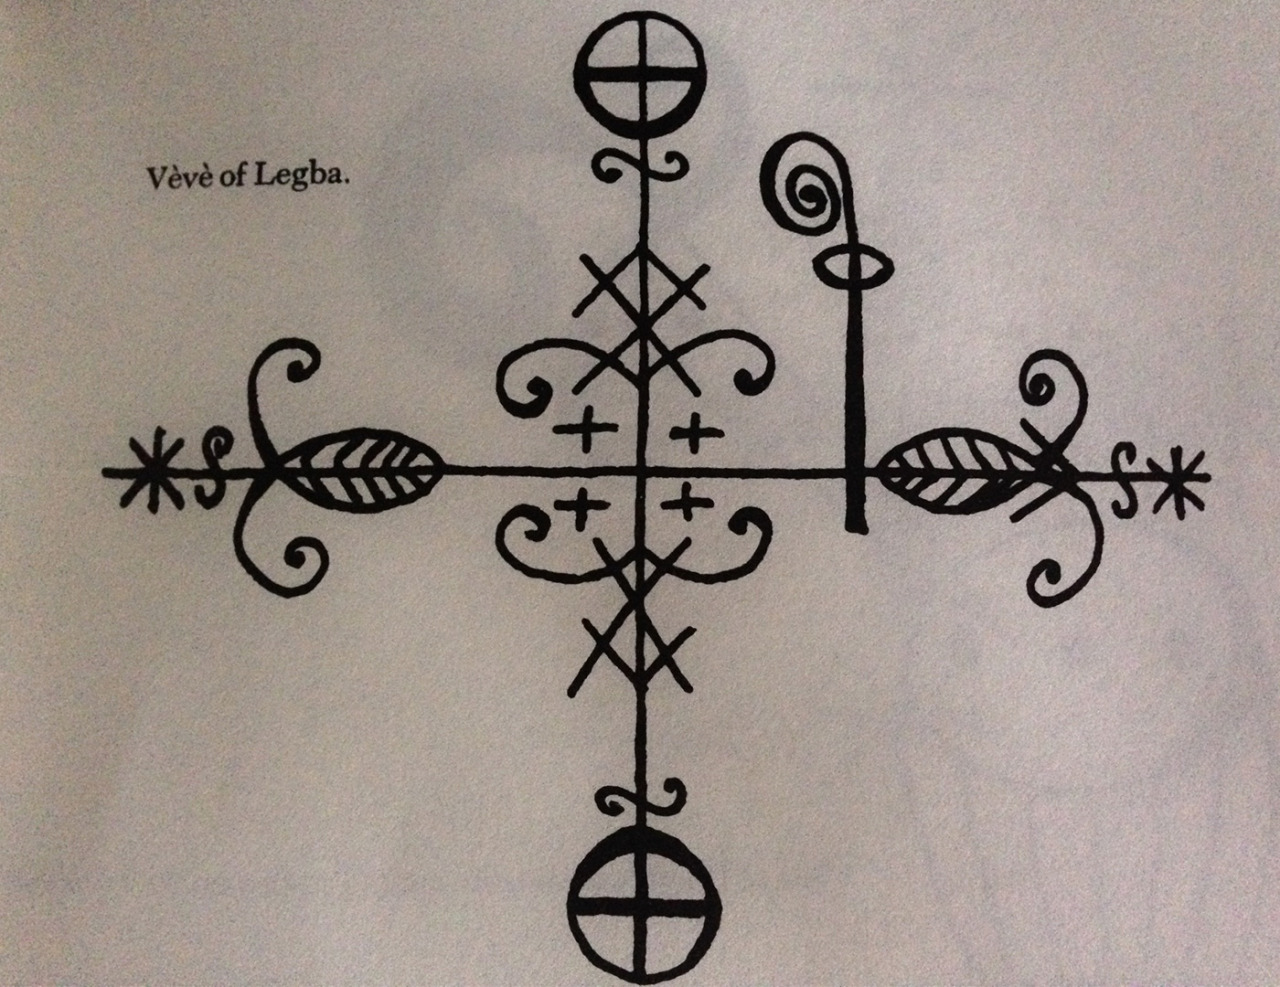 "Vèvè of Papa Legba - Master of the Crossroads, Guardian of the Pathwa...